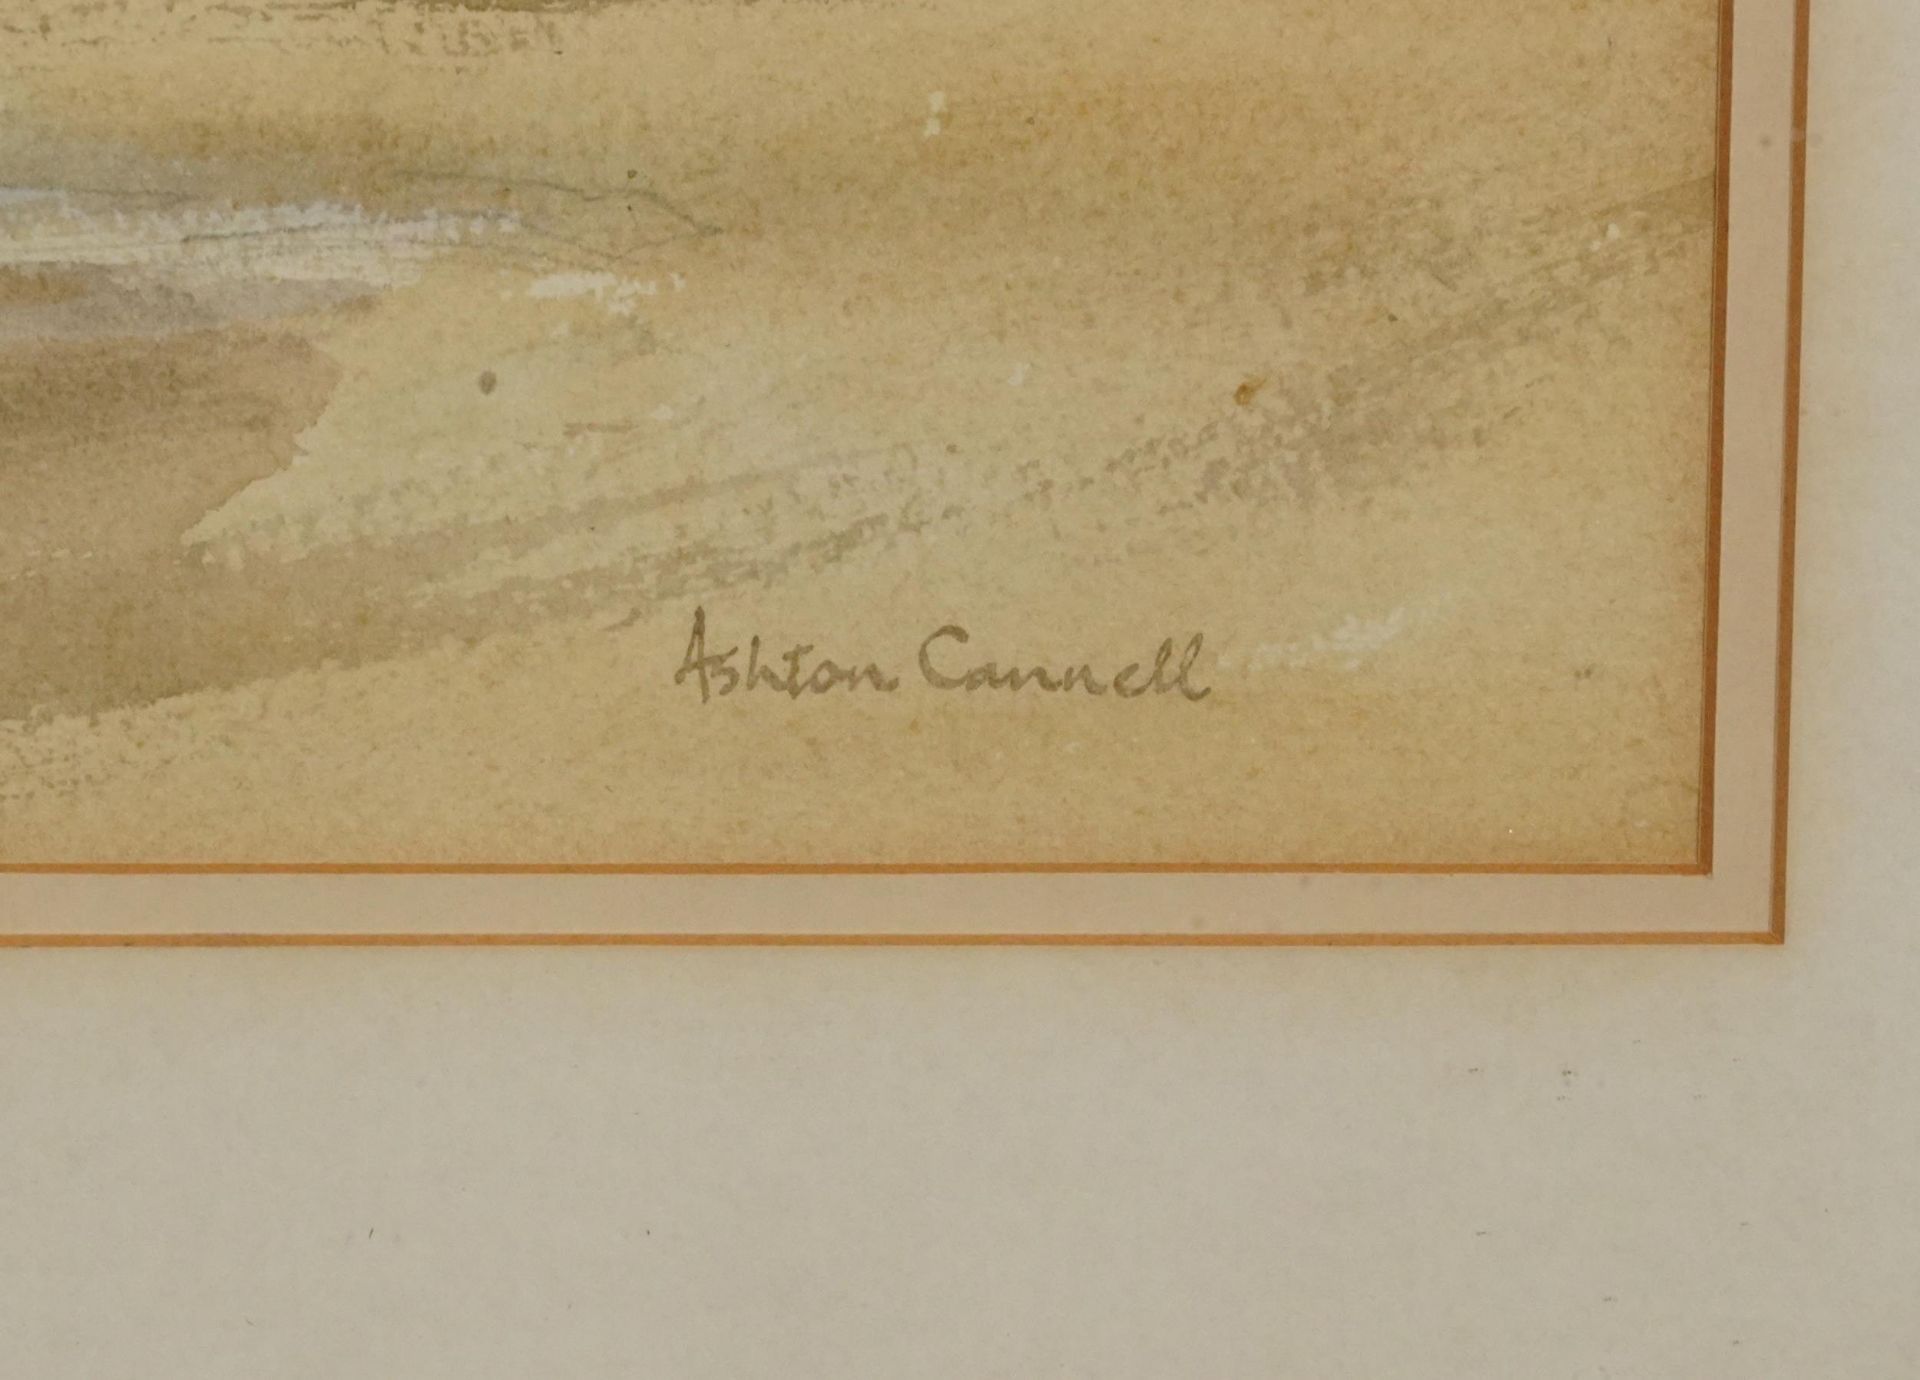 Ashton Cannell - Brentford Creek, watercolour, The Wapping Group of Artists label verso, mounted, - Image 3 of 5